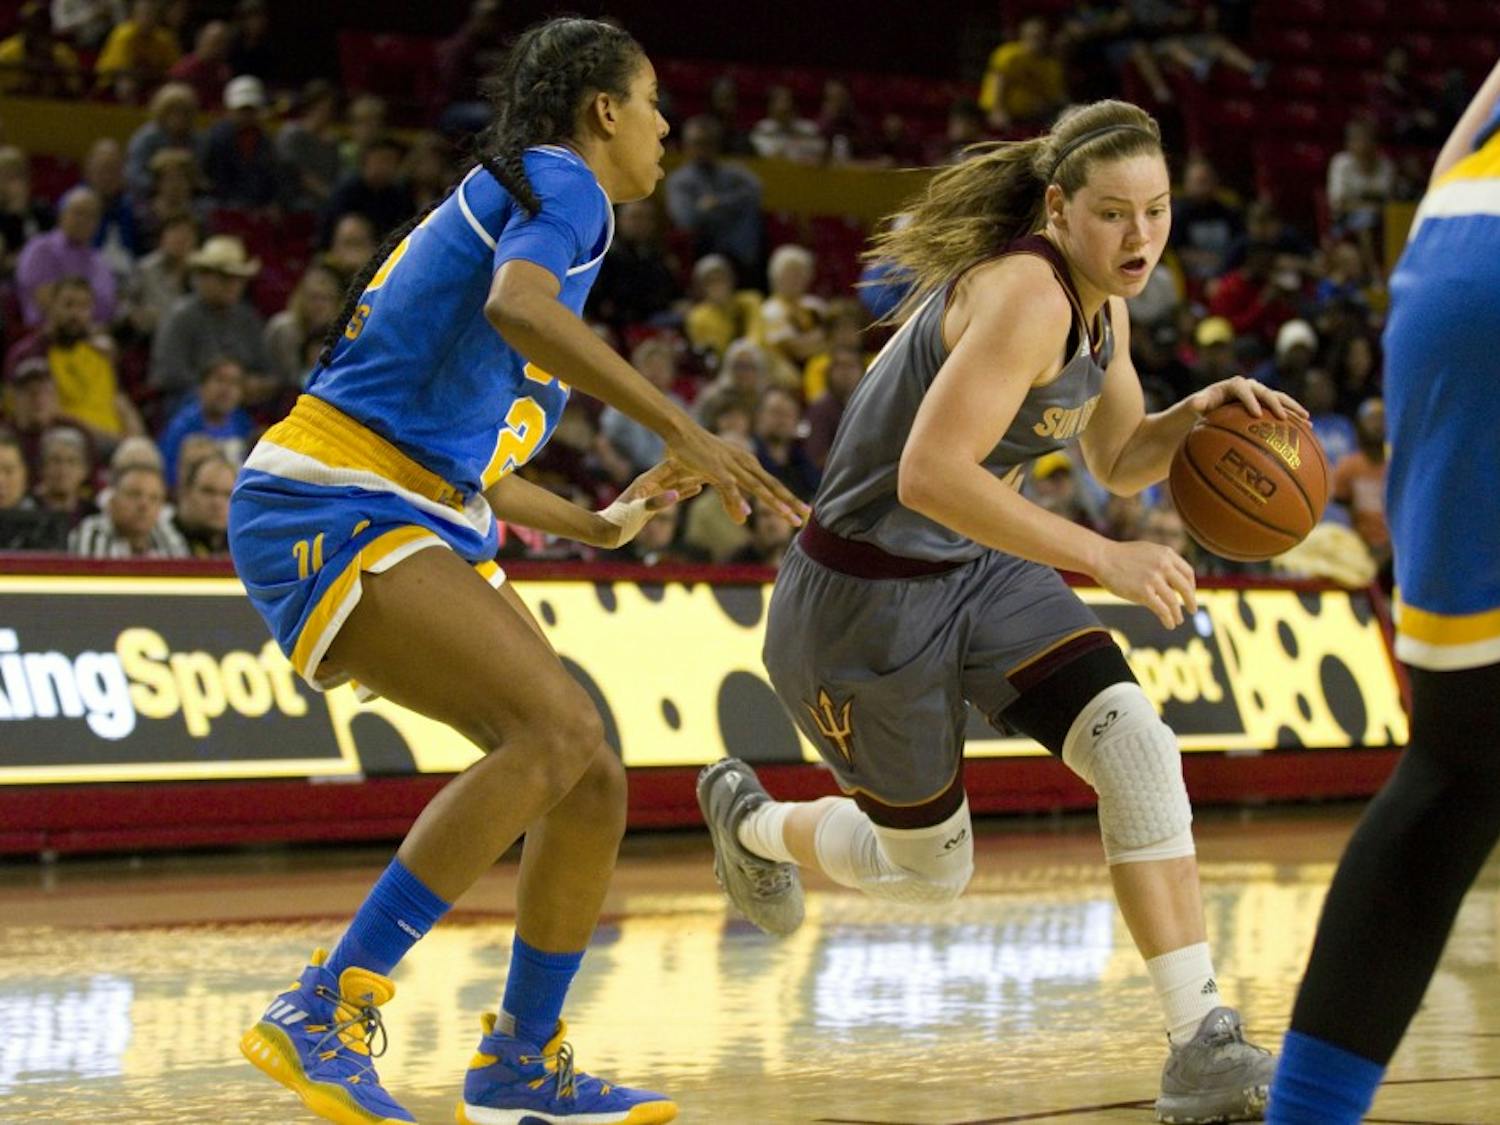 ASU senior forward Sophie Brunner (21) drives towards the basket during a women's basketball game against the no. 15 ranked UCLA Bruins in Wells Fargo Arena in Tempe, Arizona on Sunday, Feb. 26, 2017. ASU lost 55-52.  (Josh Orcutt/State Press)